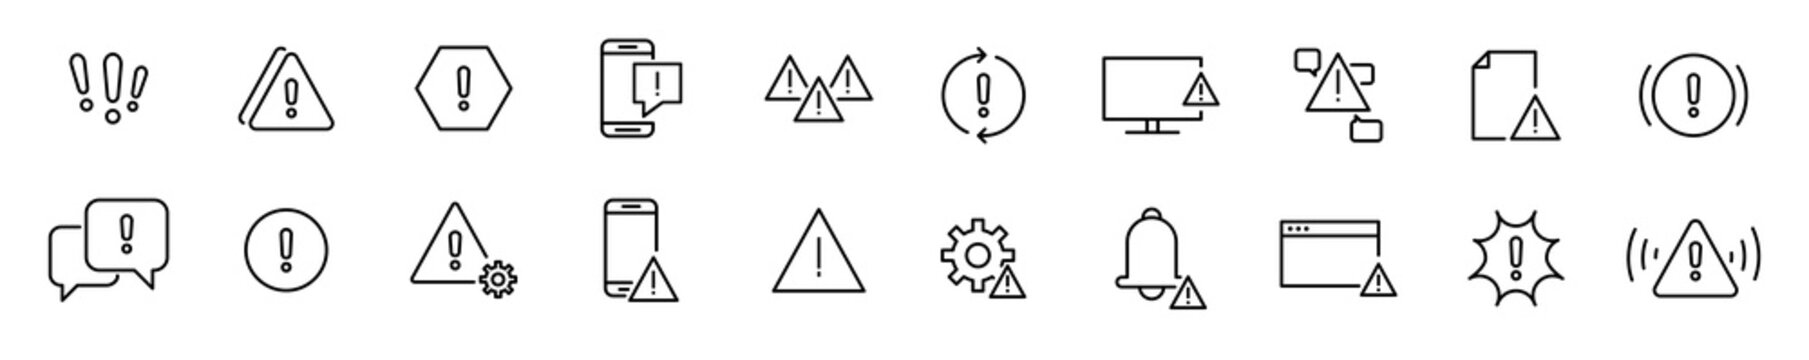 Warnings related vector line icons. Simple Set of warnings icon